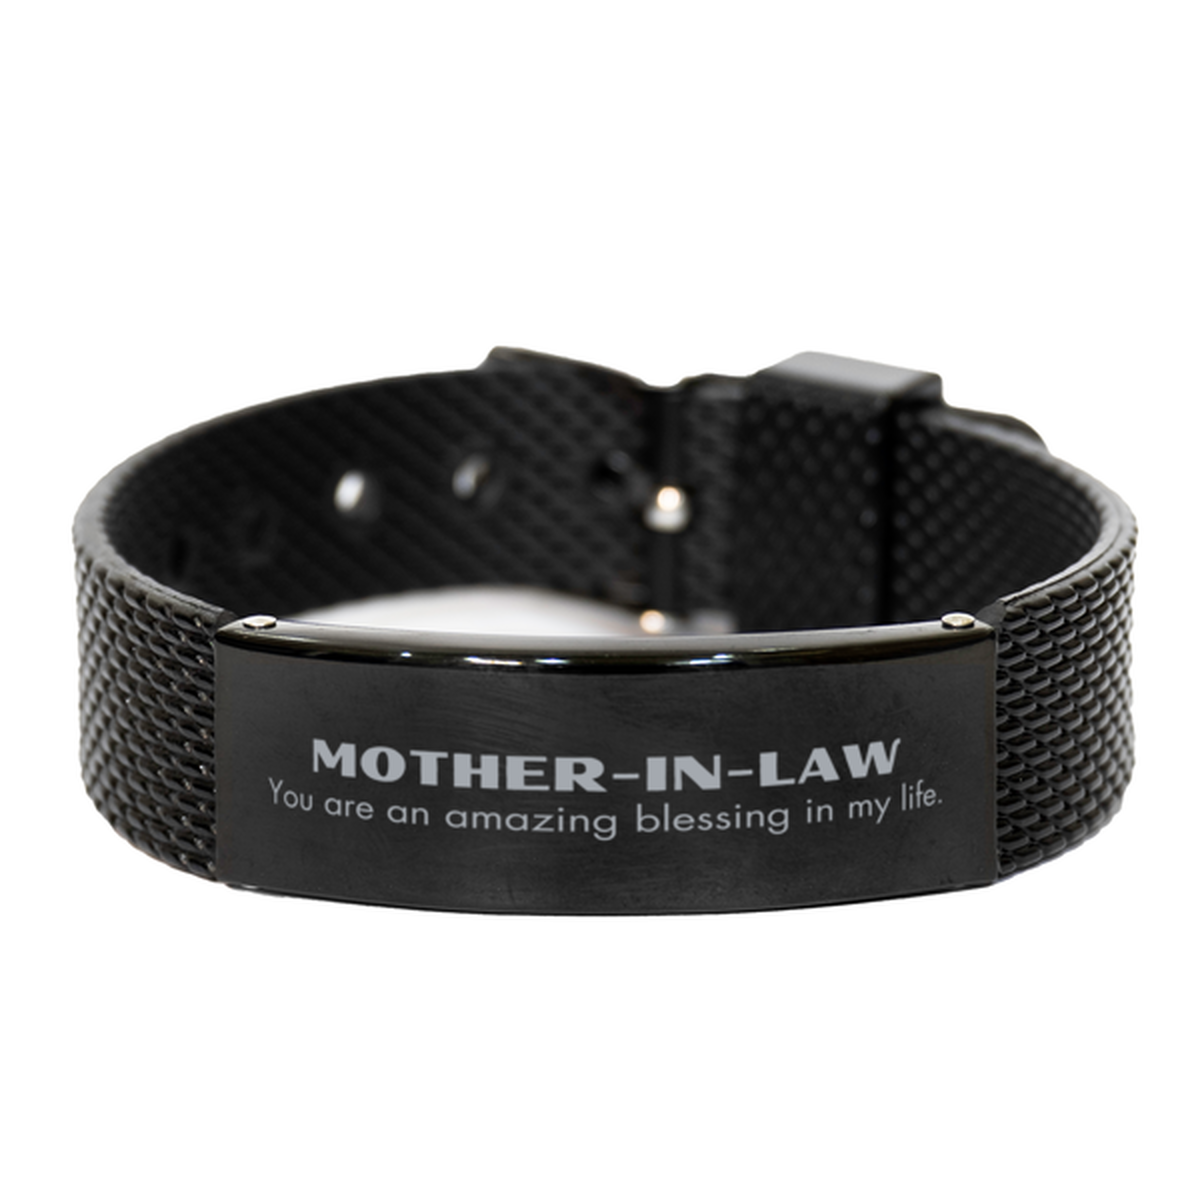 Mother-In-Law Black Shark Mesh Bracelet, You are an amazing blessing in my life, Thank You Gifts For Mother-In-Law, Inspirational Birthday Christmas Unique Gifts For Mother-In-Law